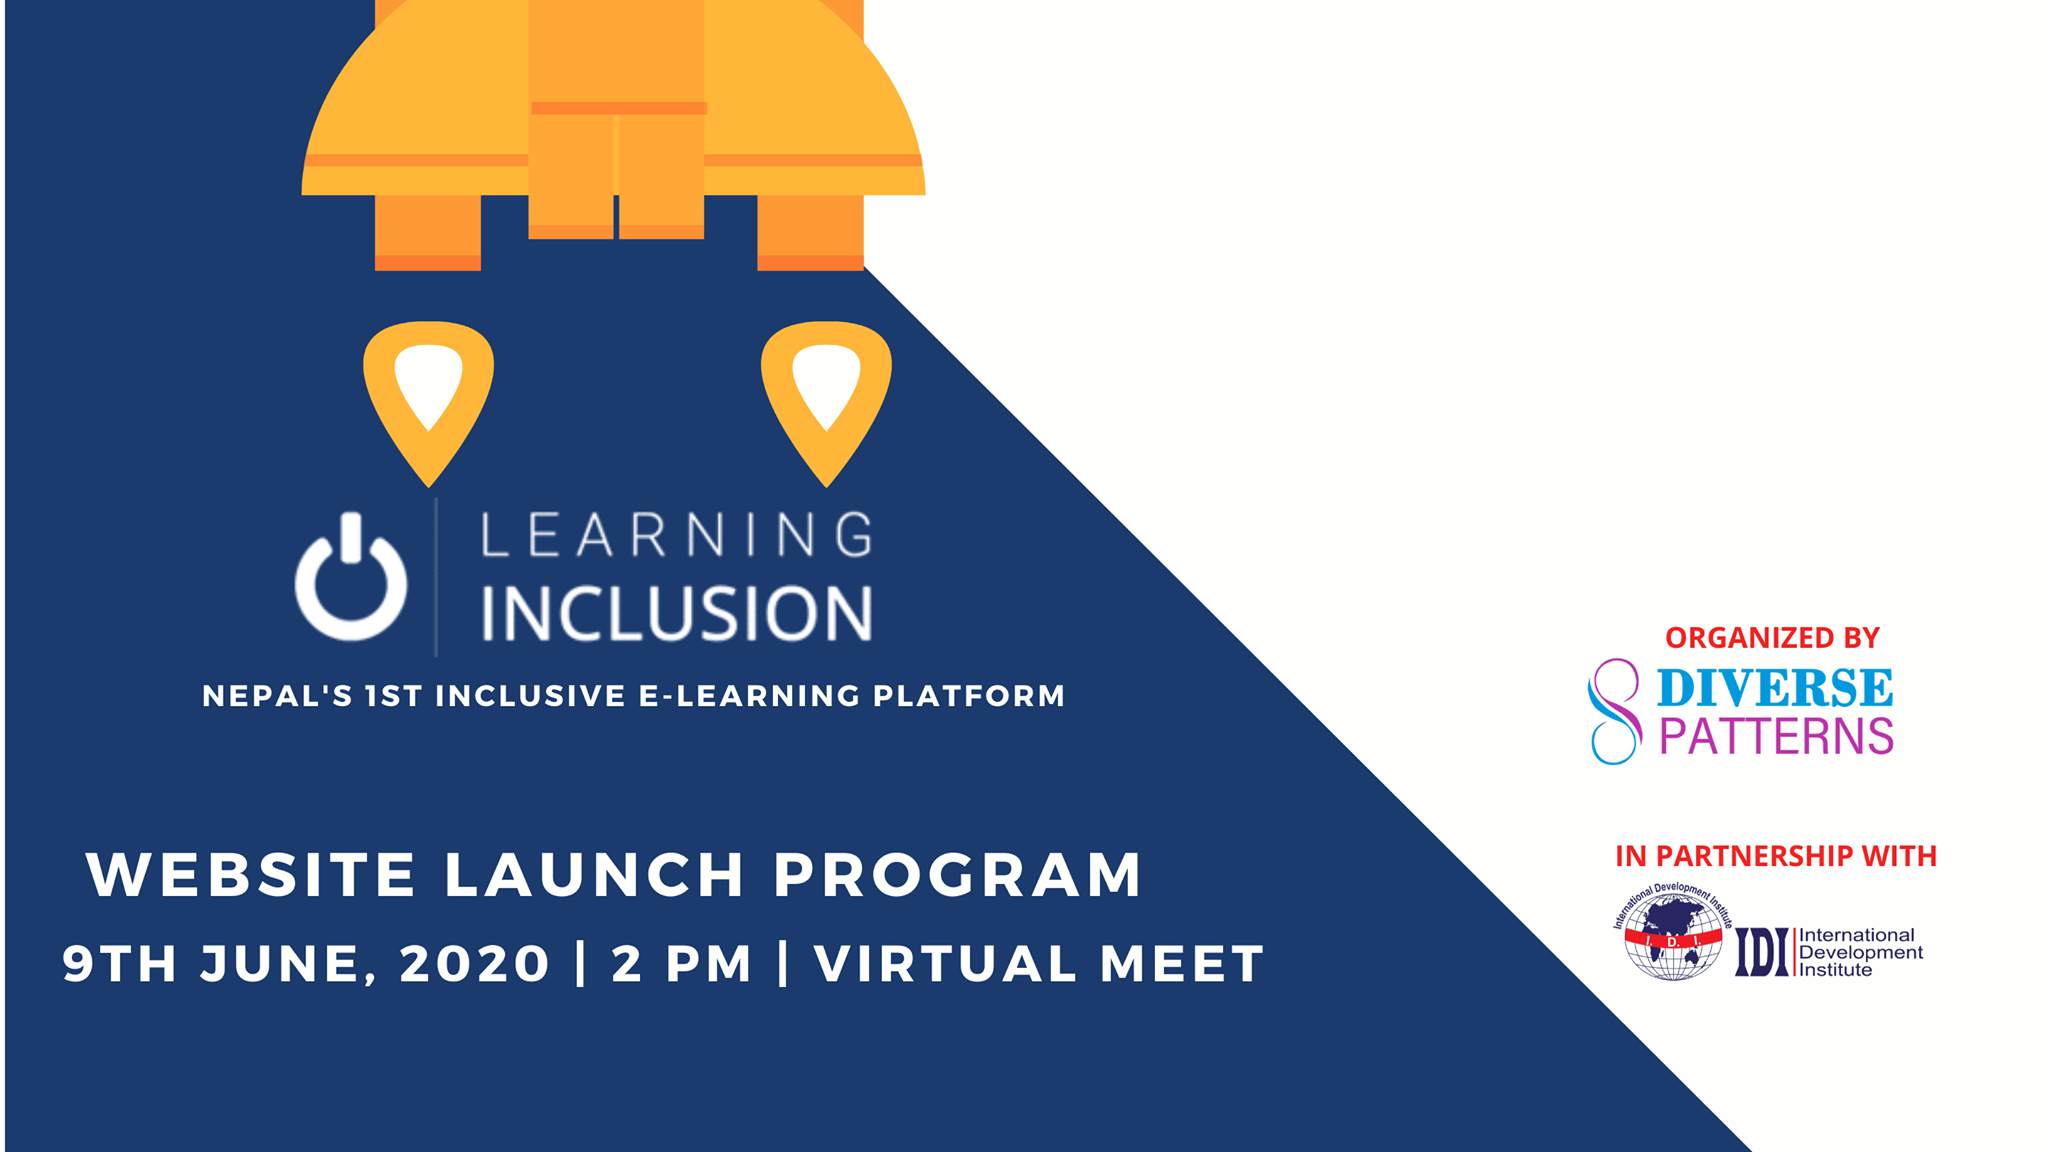 Learning Inclusion Launched - Nepal's First Inclusive e-learning Platfrom